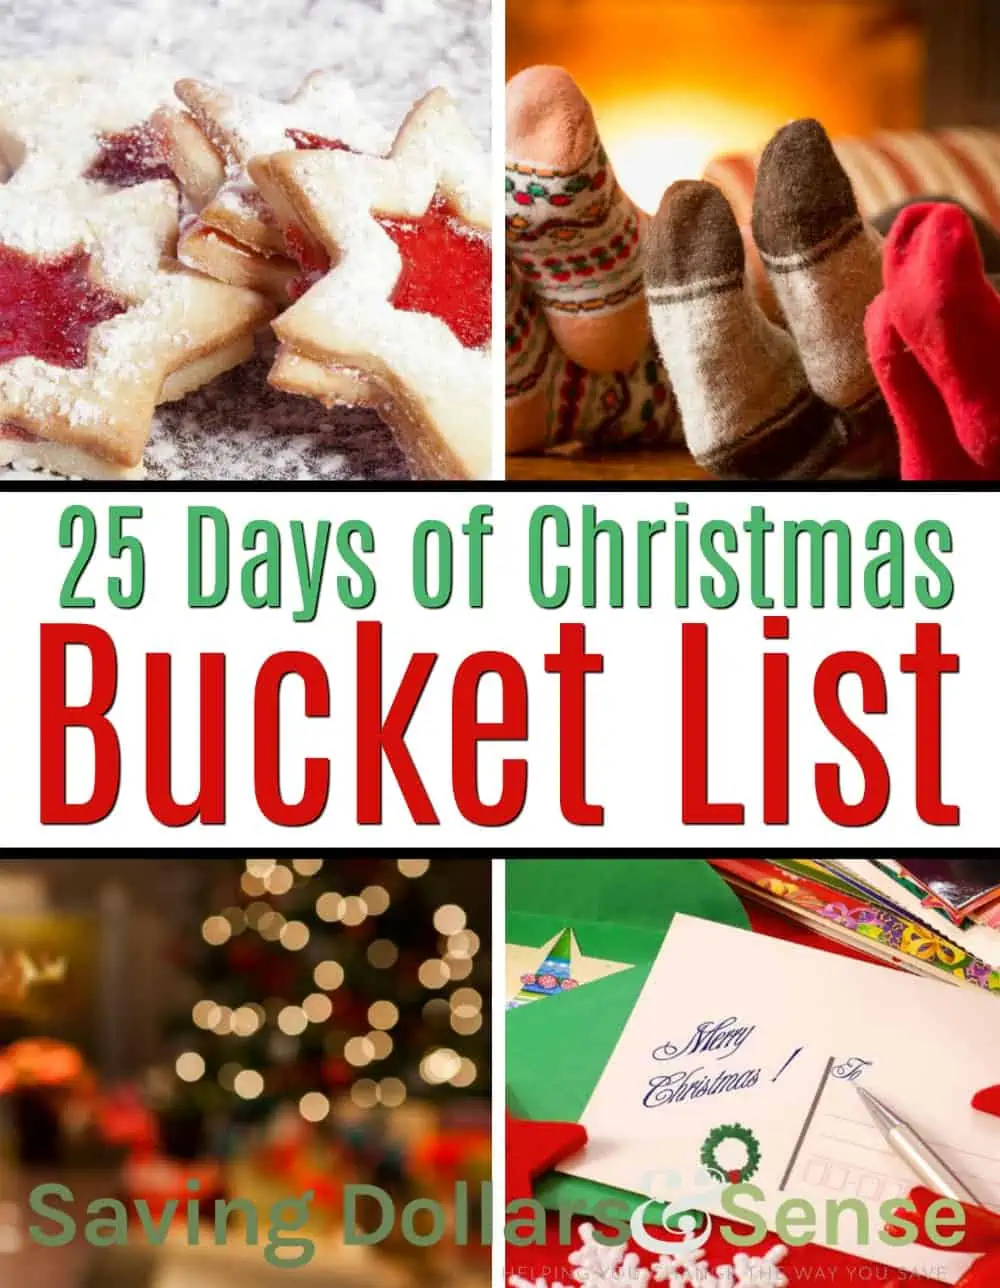 25 Days of Christmas Bucket List and family fun activities.